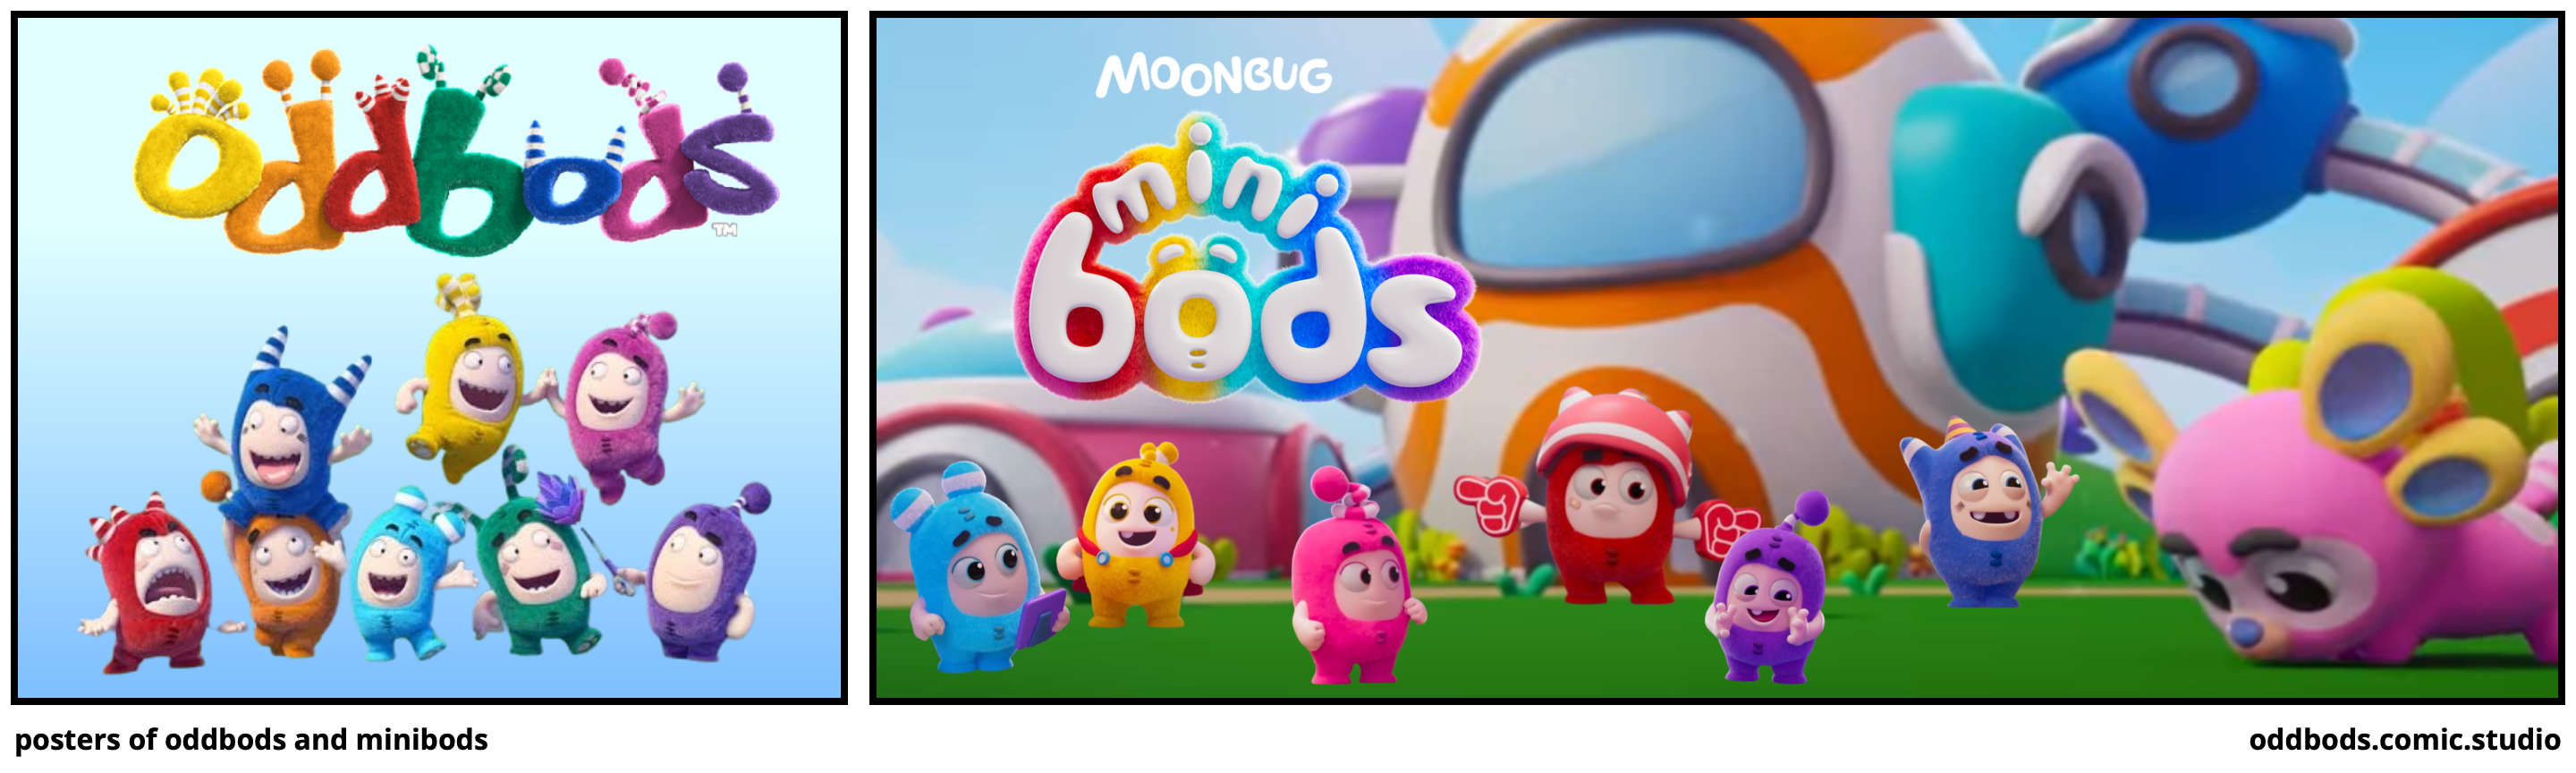 posters of oddbods and minibods